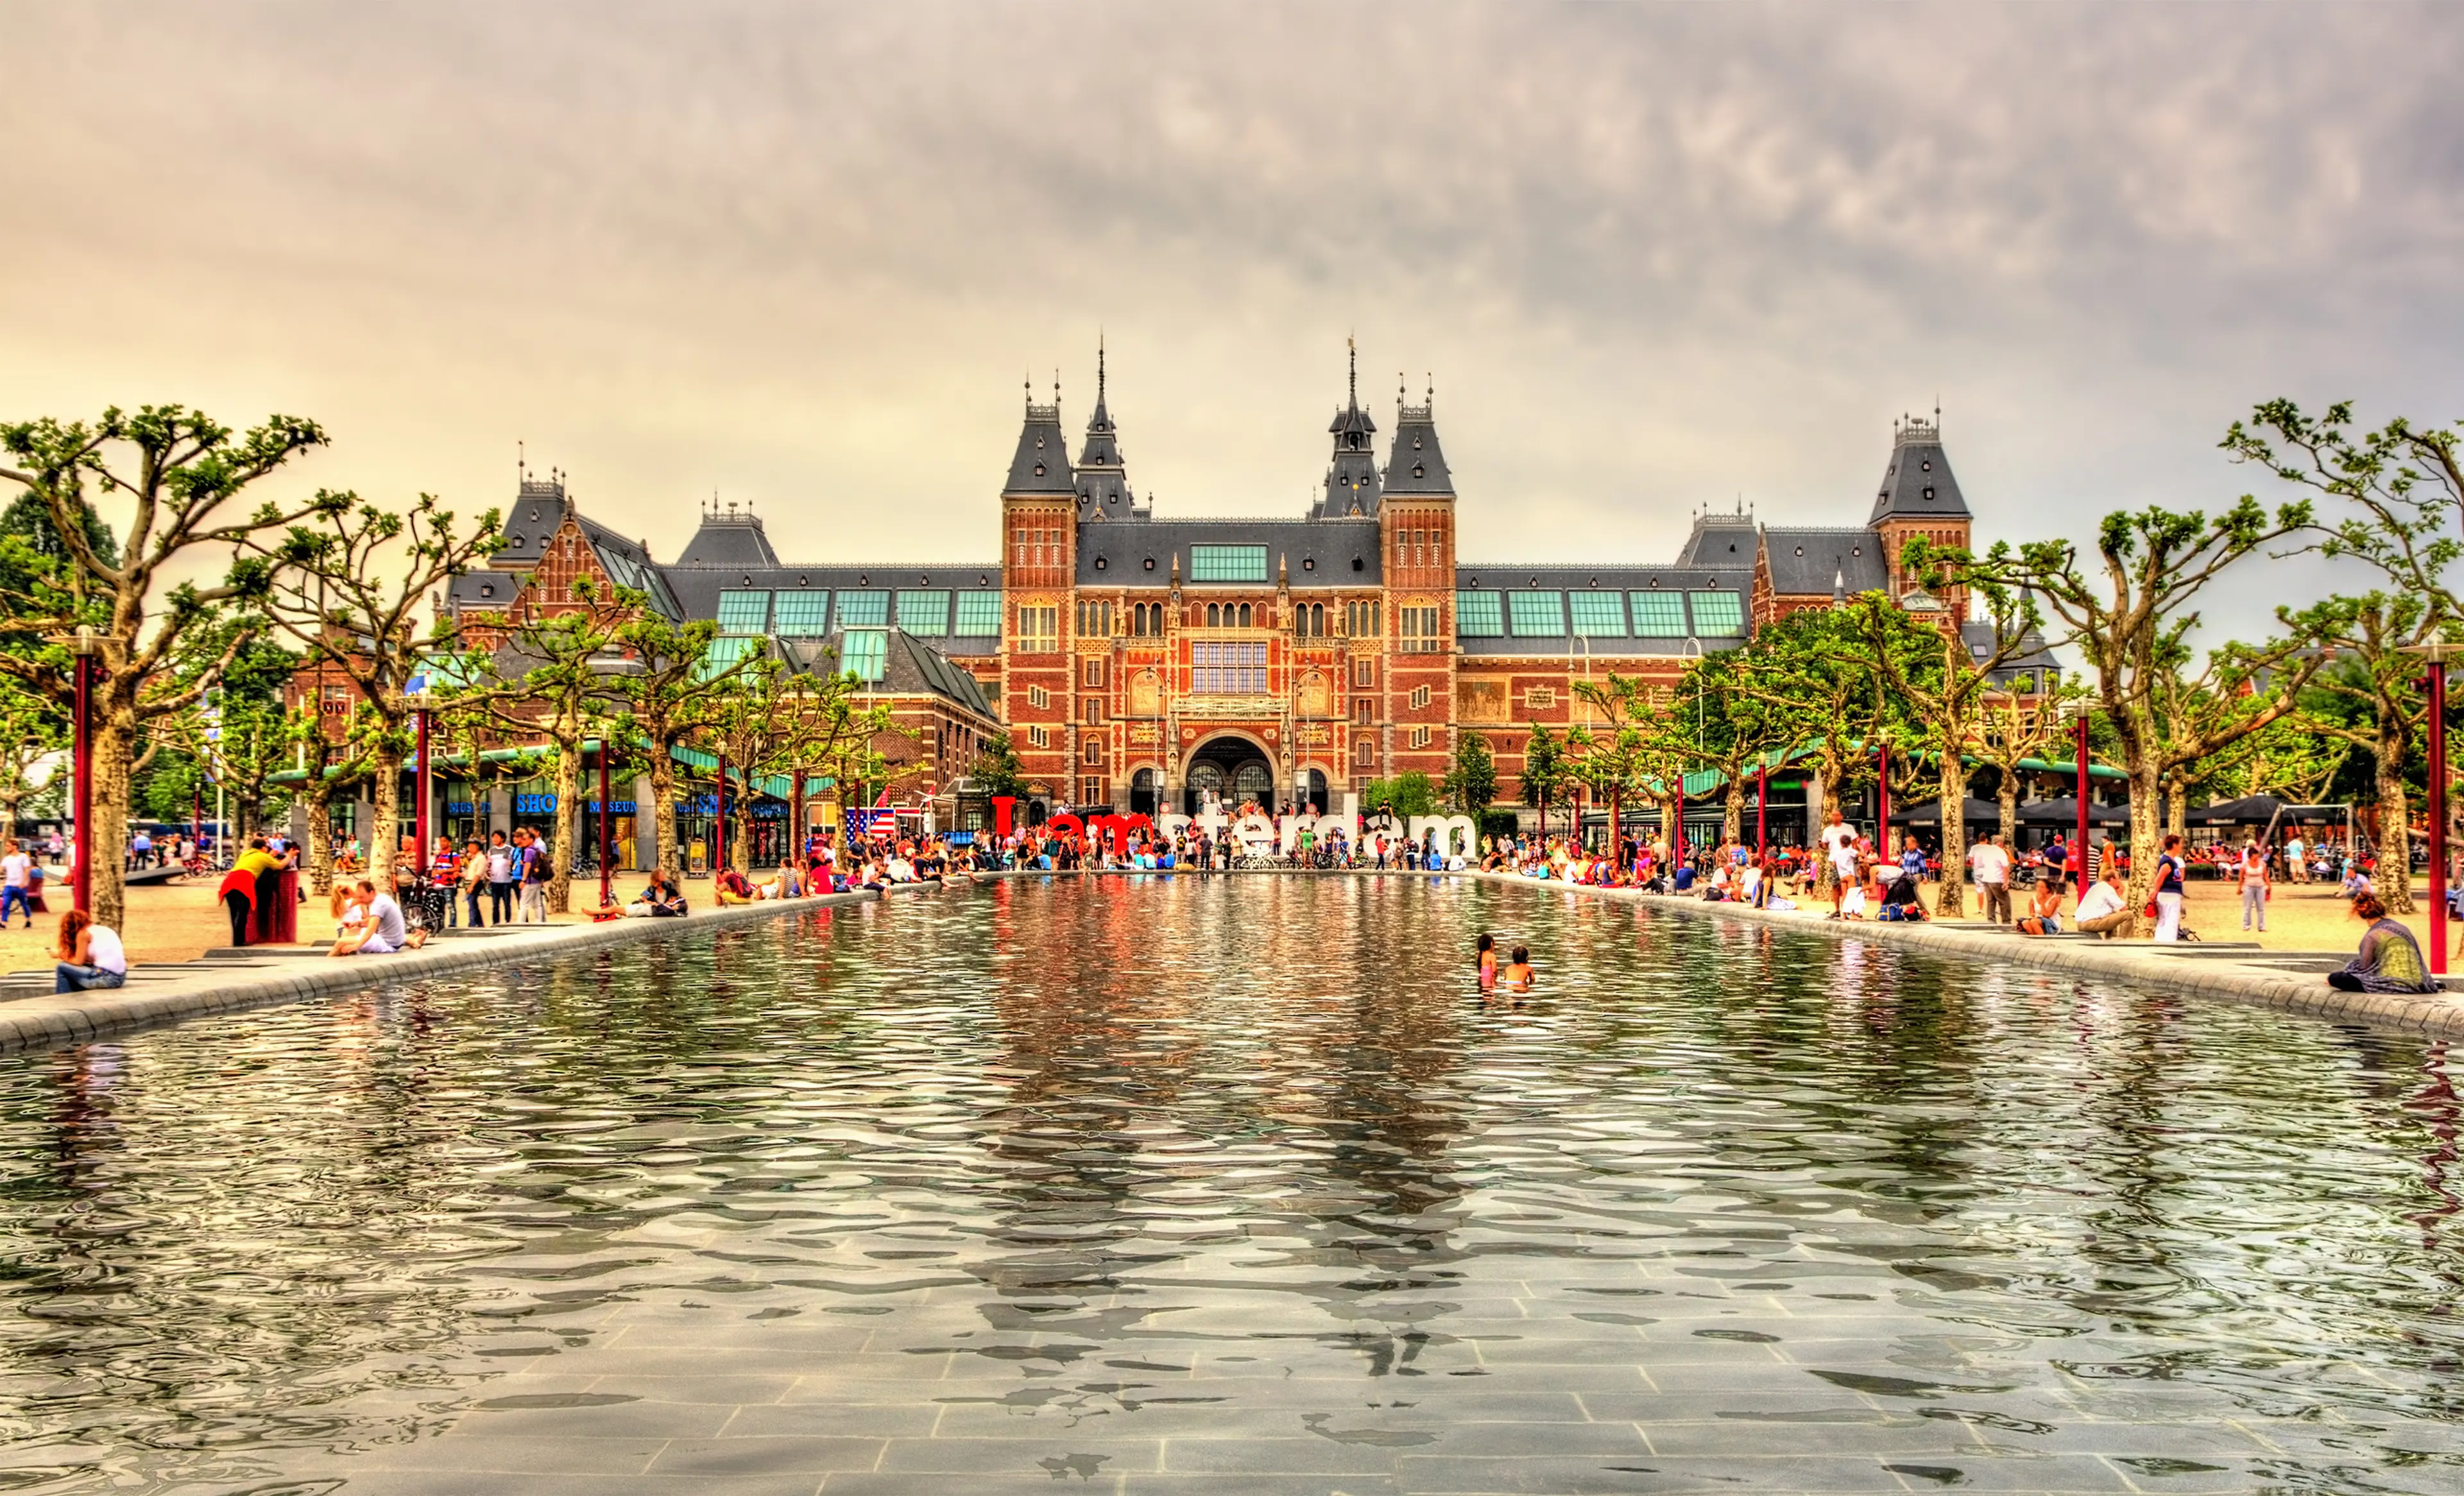 1-Day Local Food, Wine and Shopping Experience in Amsterdam with Friends